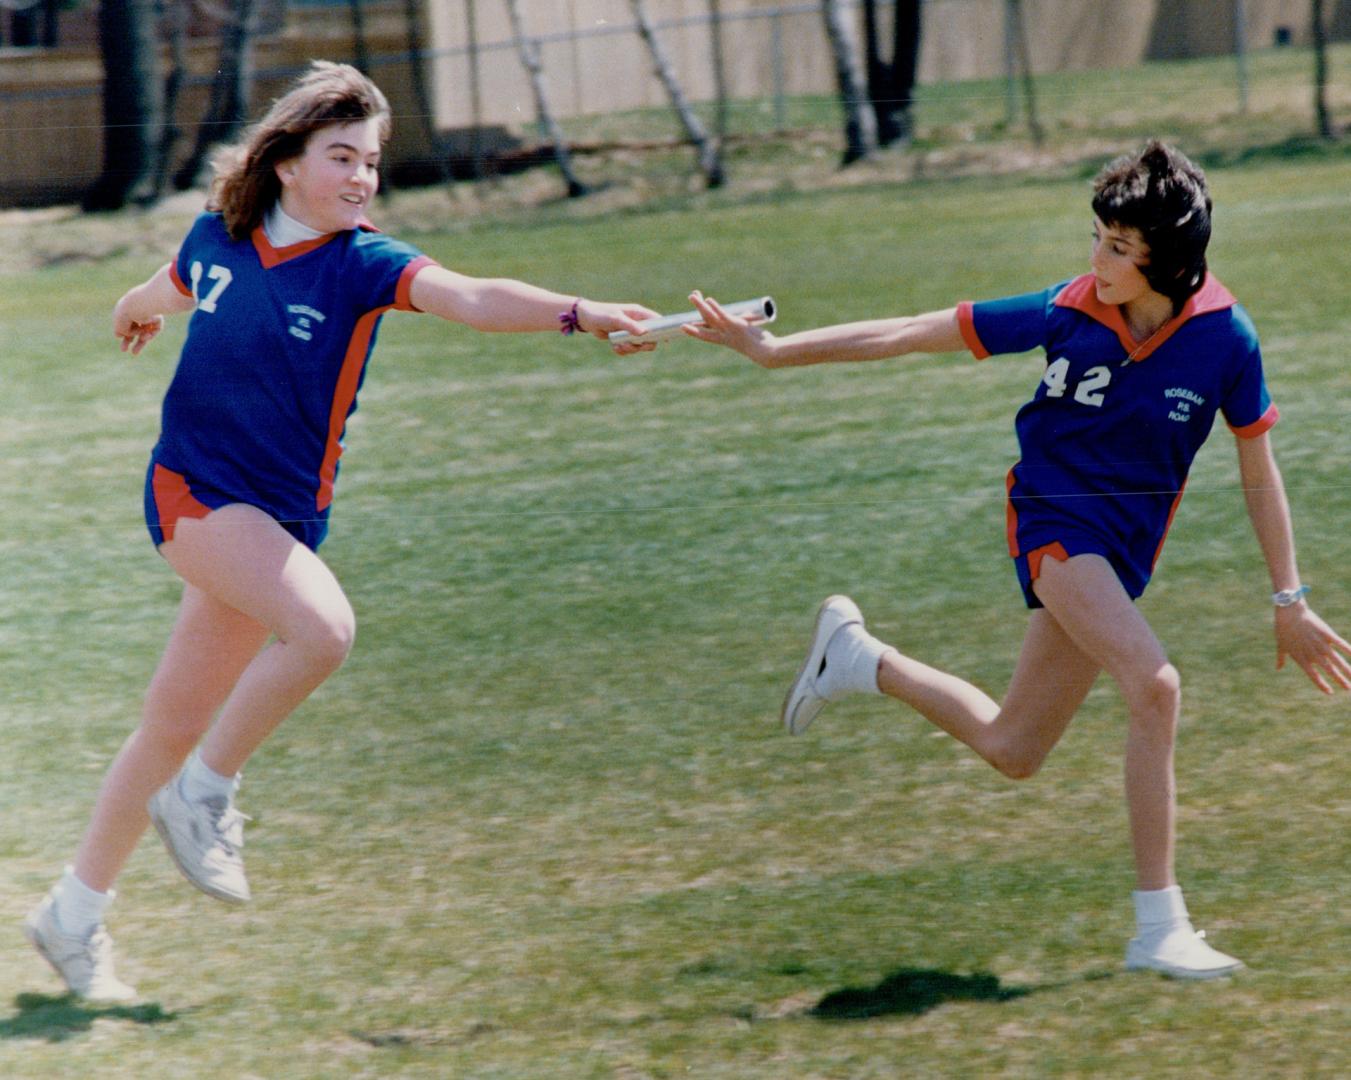 Kerri McLaughlin, left, Passes the baton to Angie Graham, both Grade 7 students at Rosebank public school, during a practice for the Durham track and field finals scheduled for June 8